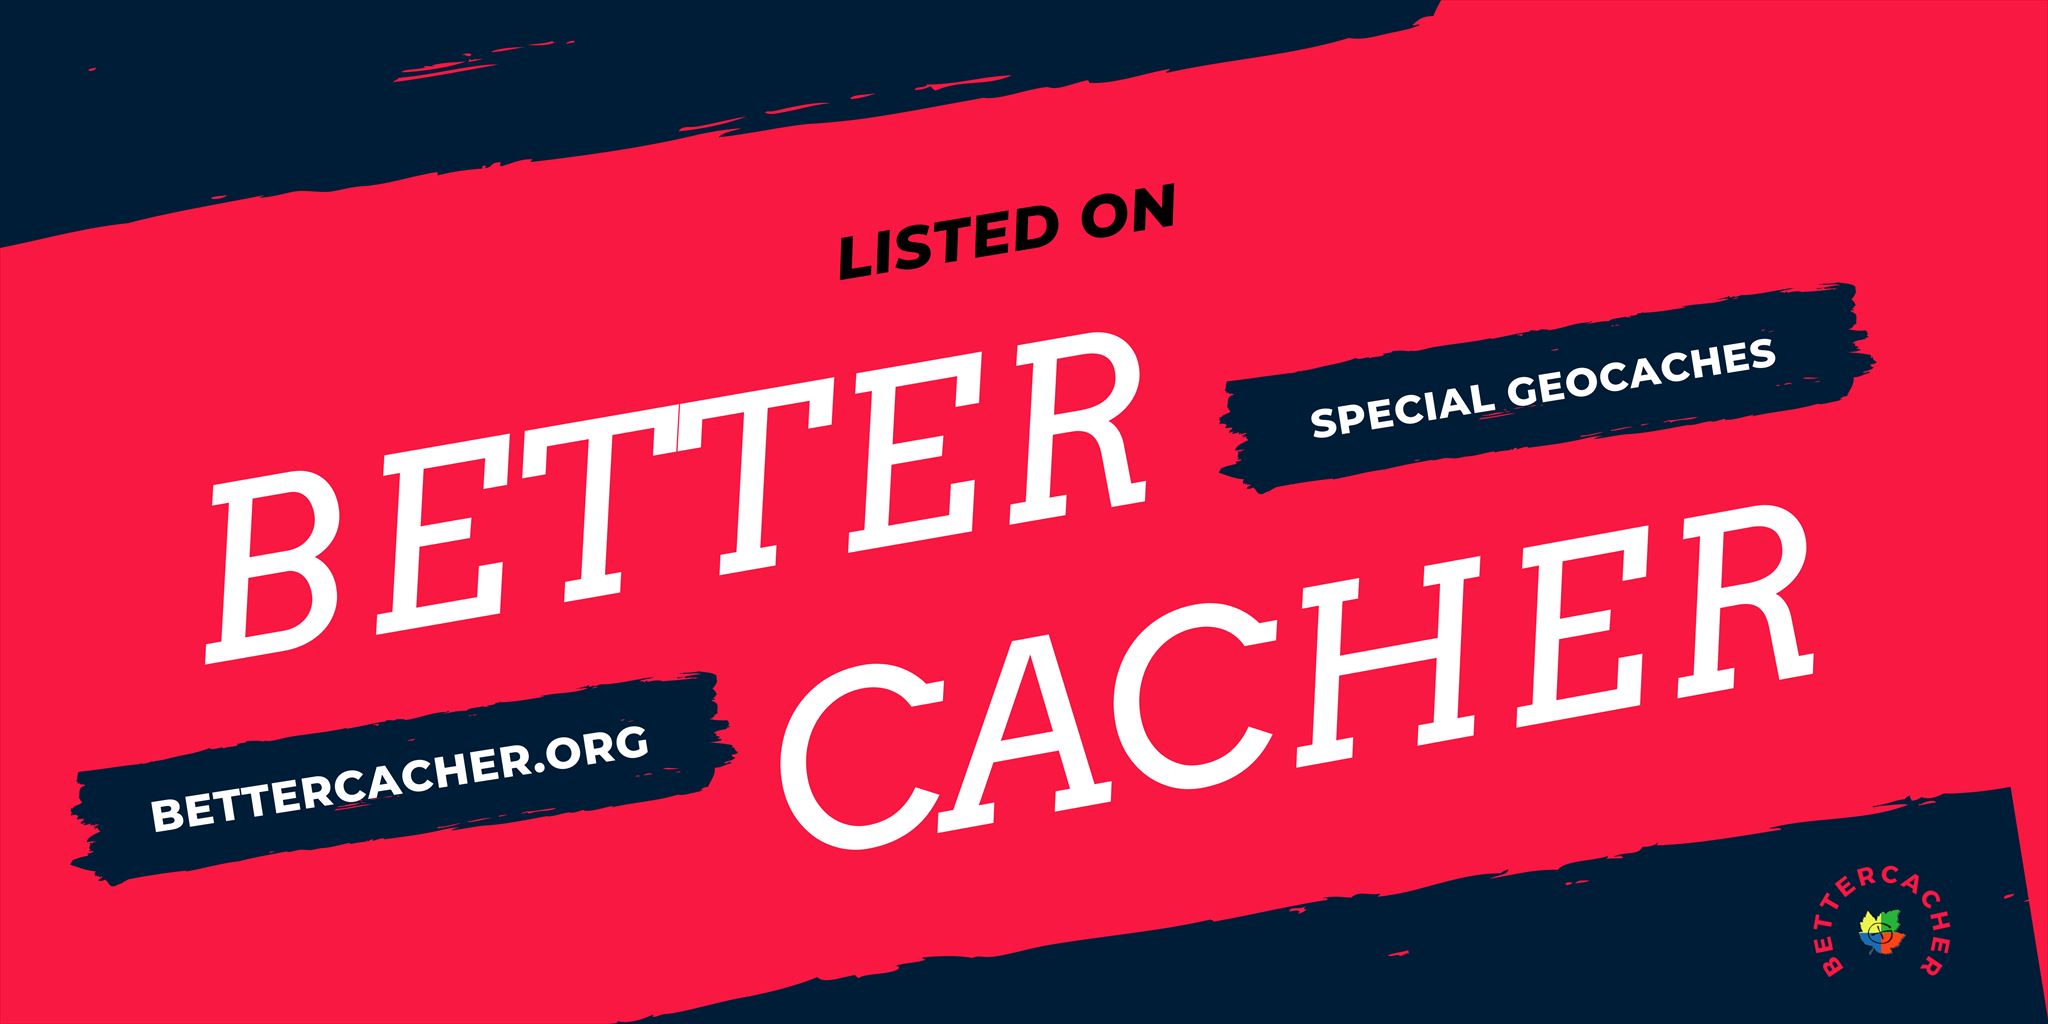 This cache is listed on BetterCacher.org.